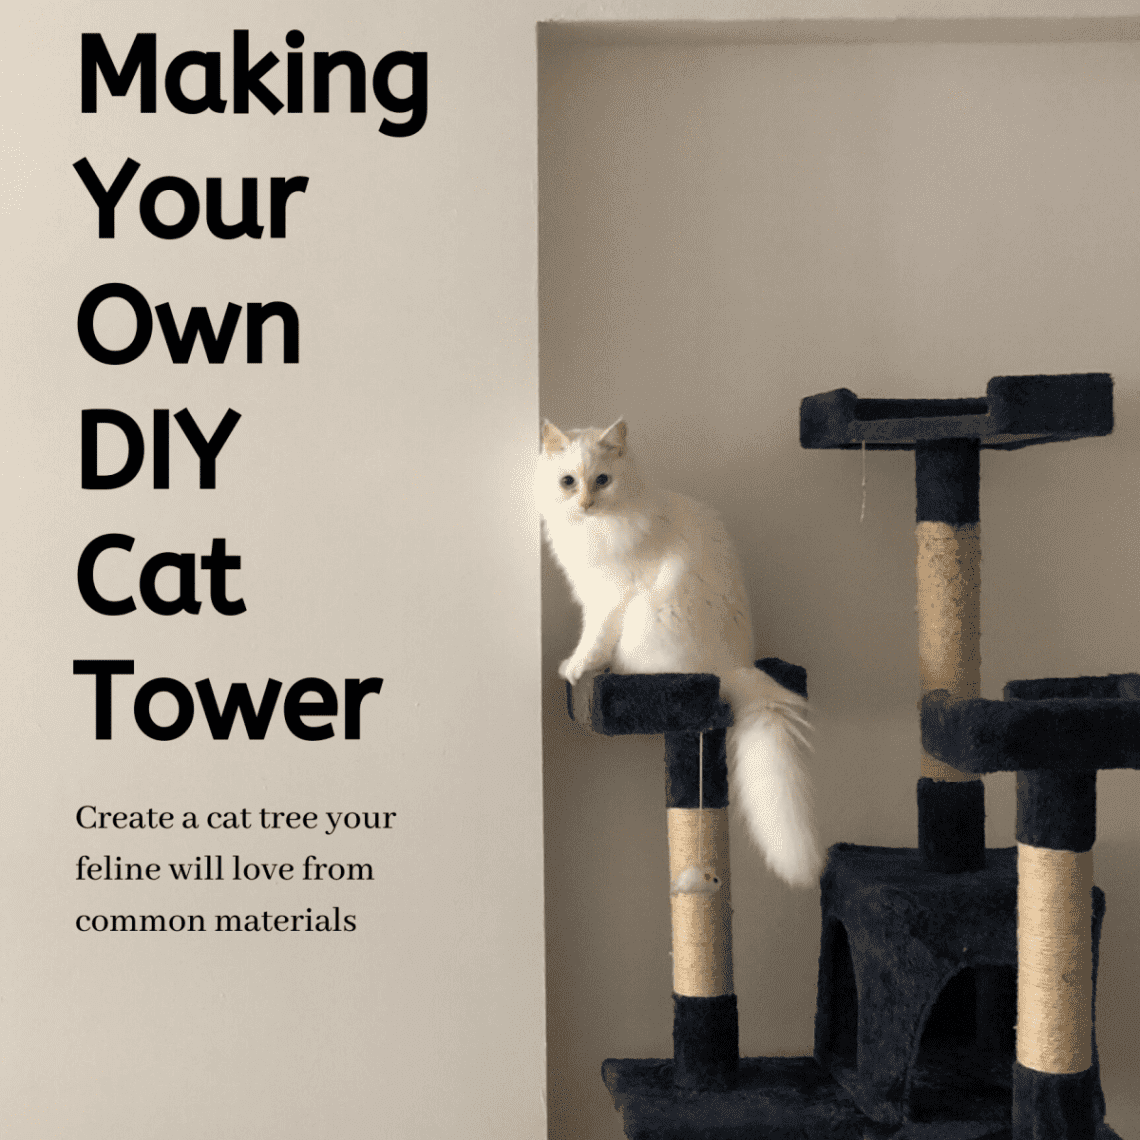 Tips for making a homemade cat play set